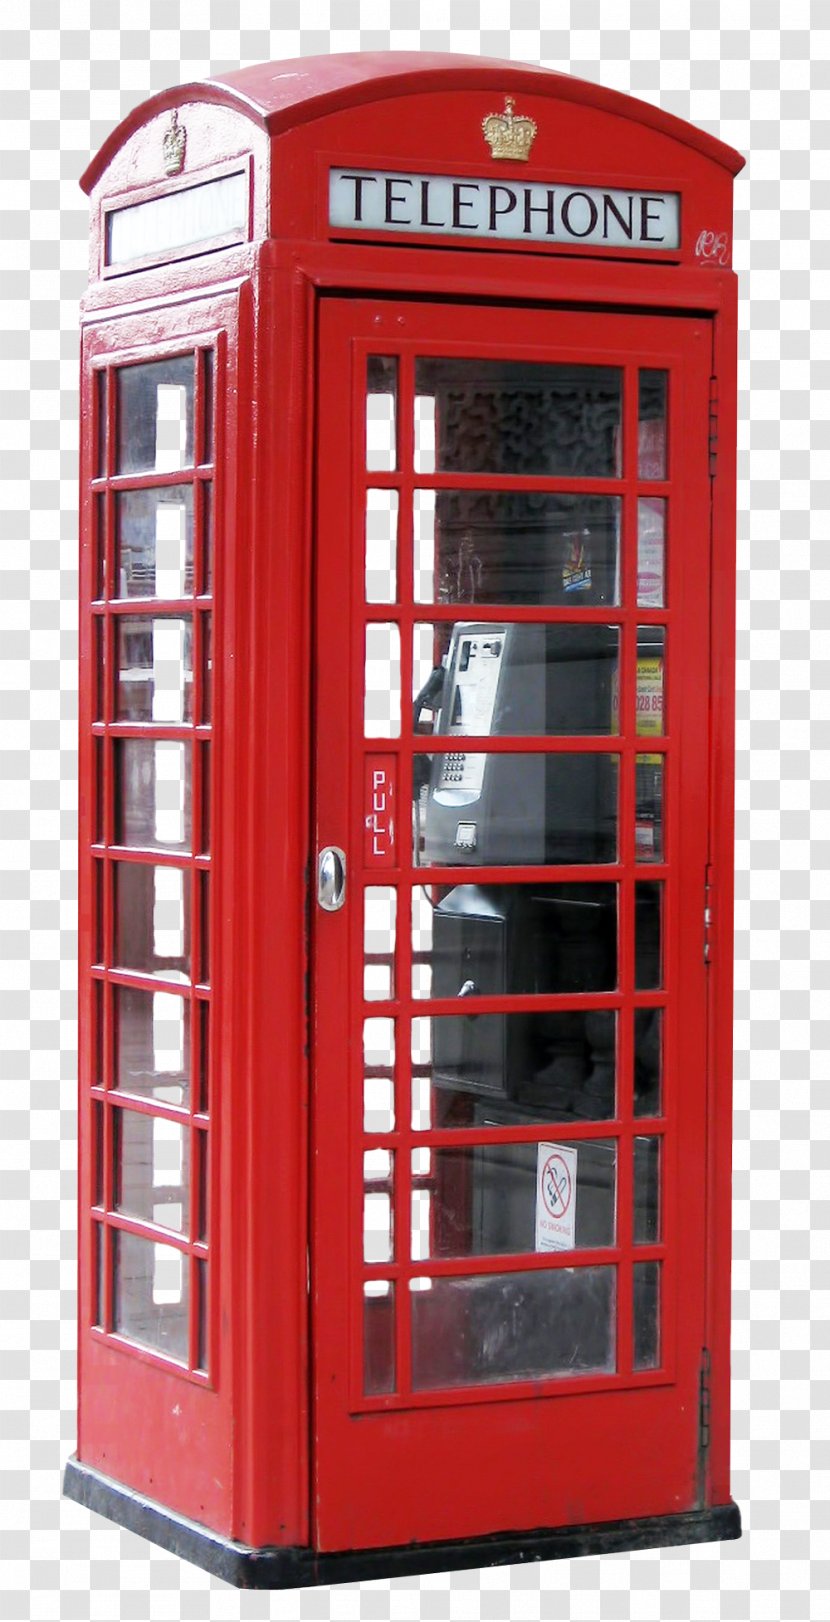 Telephone Booth - Mobile Phones - Iphone Transparent PNG